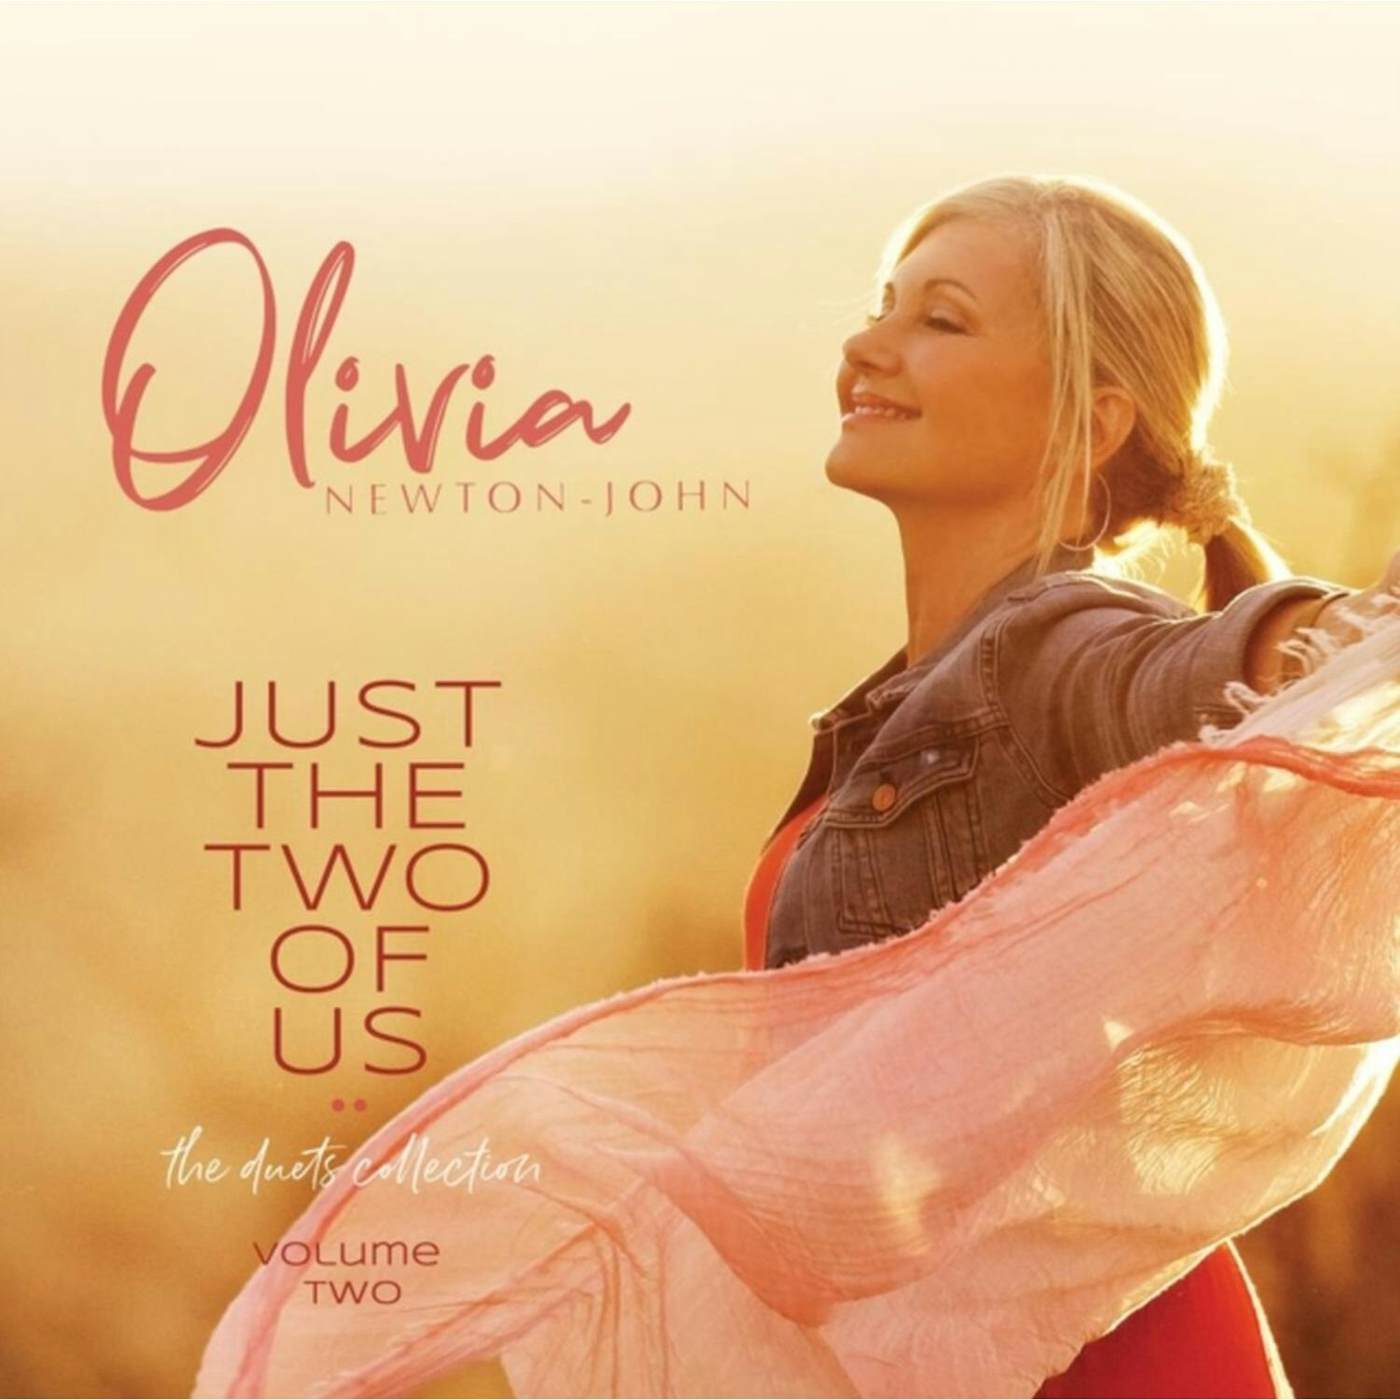 Olivia Newton-John Just The Two Of Us: The Duets Collection (Volume 2) LP (Vinyl)